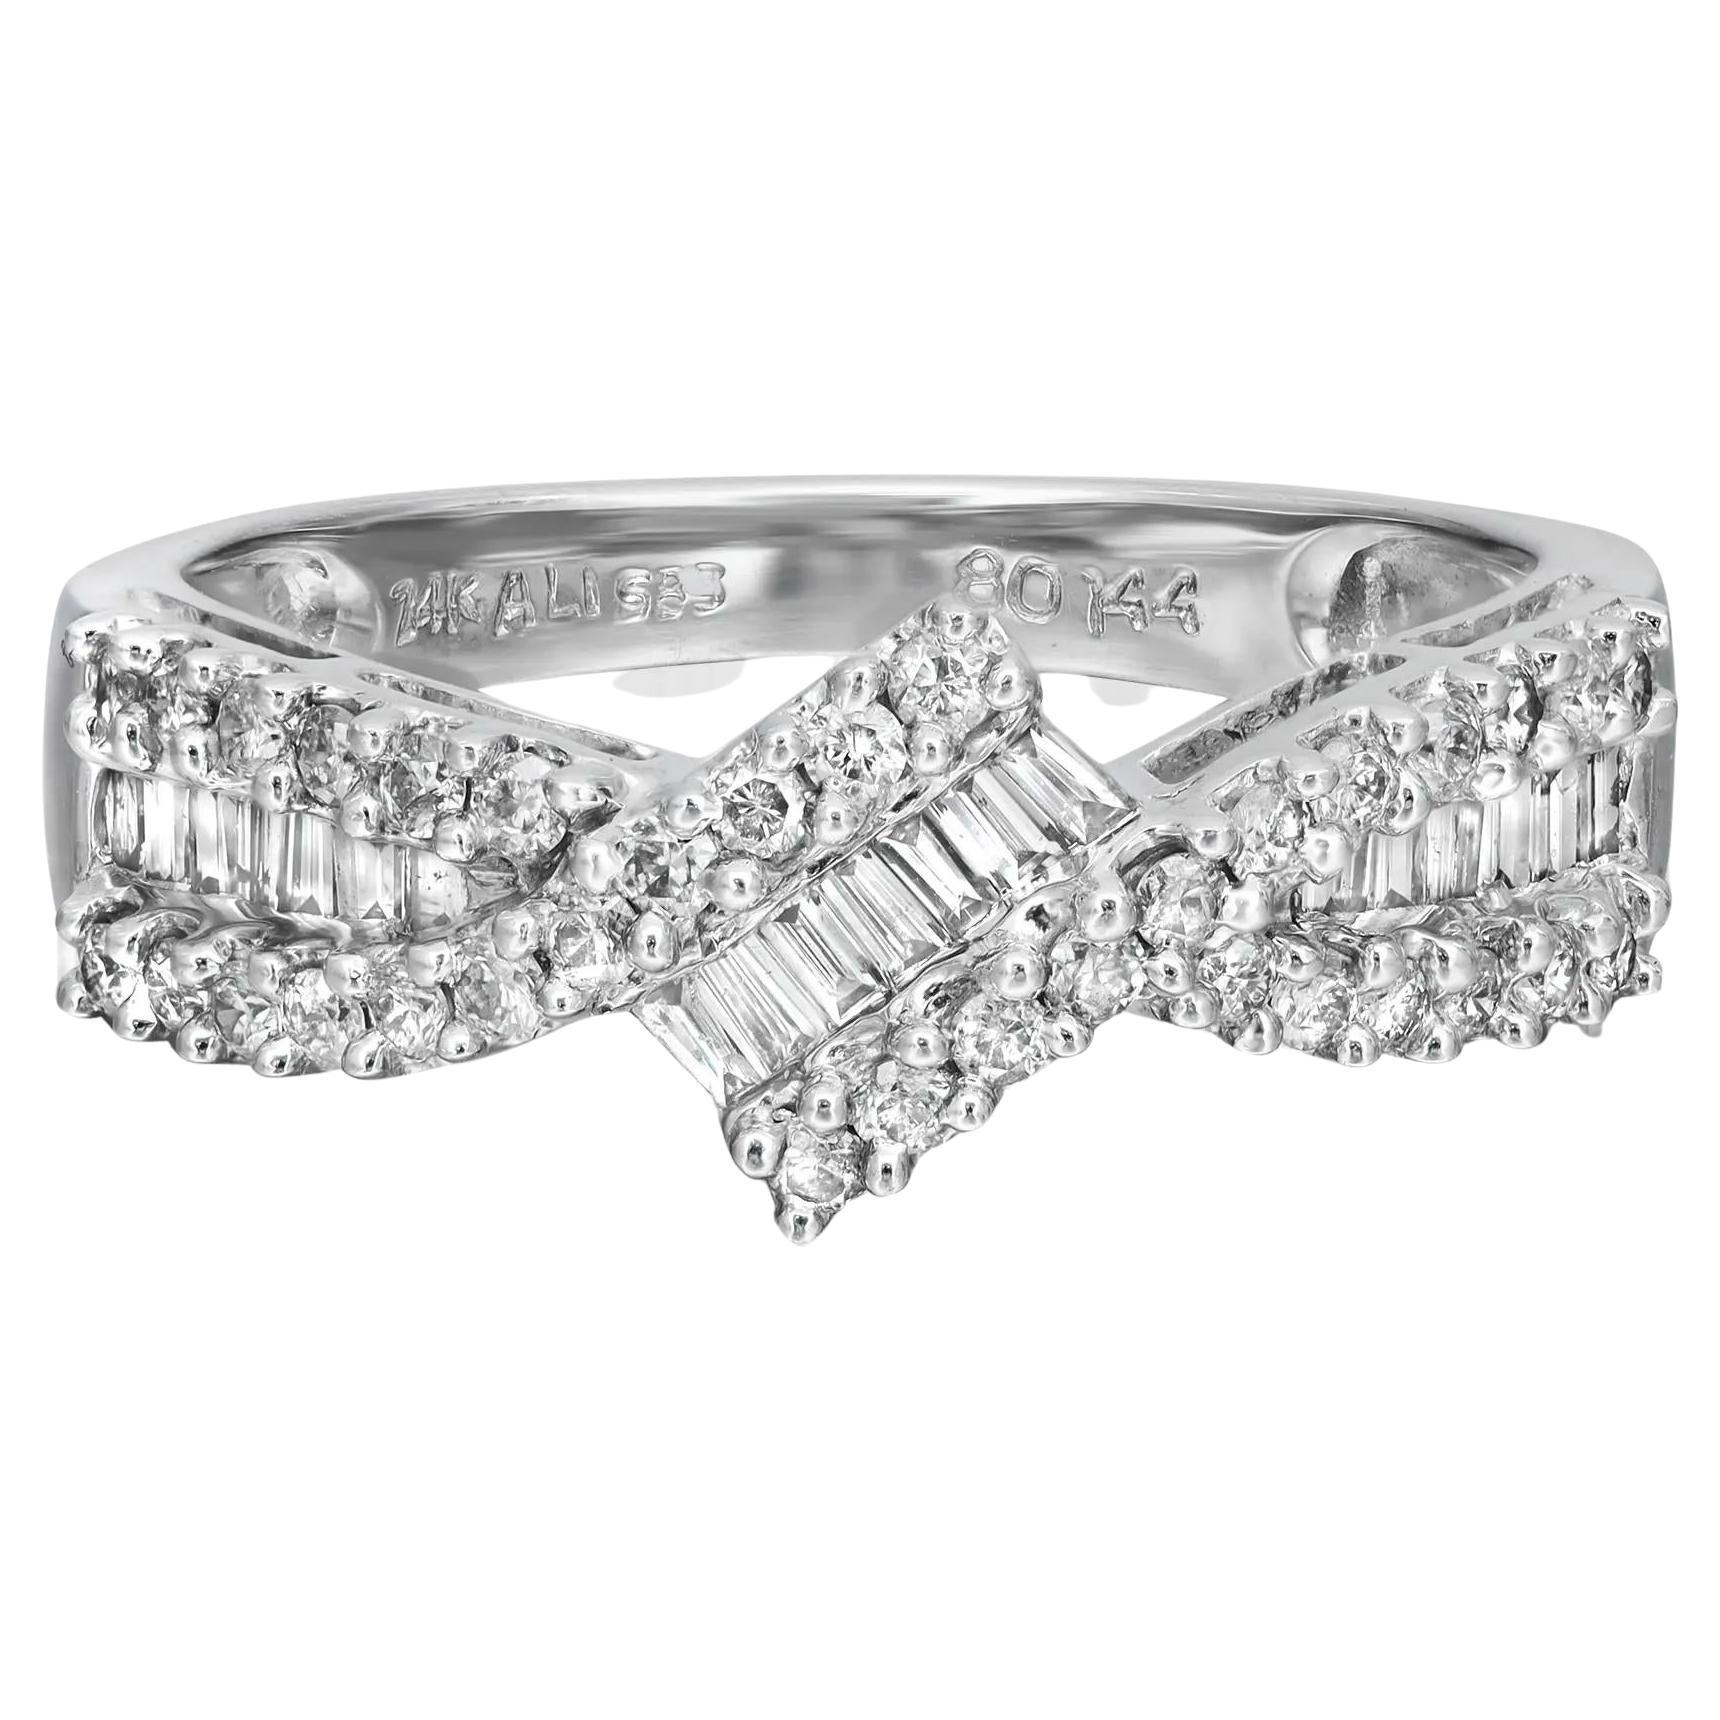 0.30Cttw Baguette & 0.35Cttw Round Diamond Ladies Ring 14K White Gold Size 7.75 For Sale